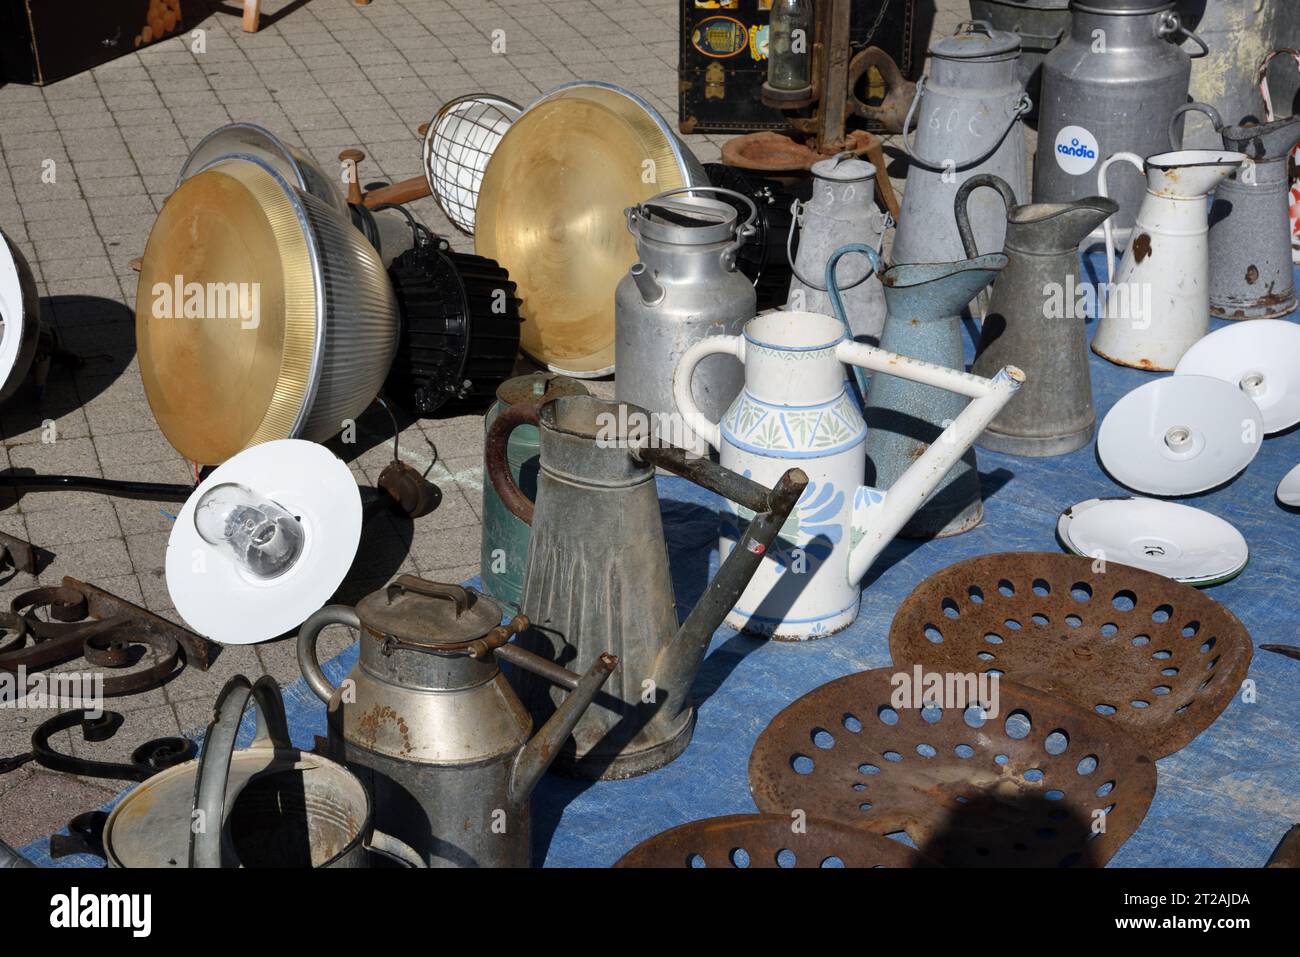 Vintage, Collectable or Collectible Lamps, Watering Cans and Milk Churns on Market Stall, Antiquities Market or Brocante Provence France Stock Photo